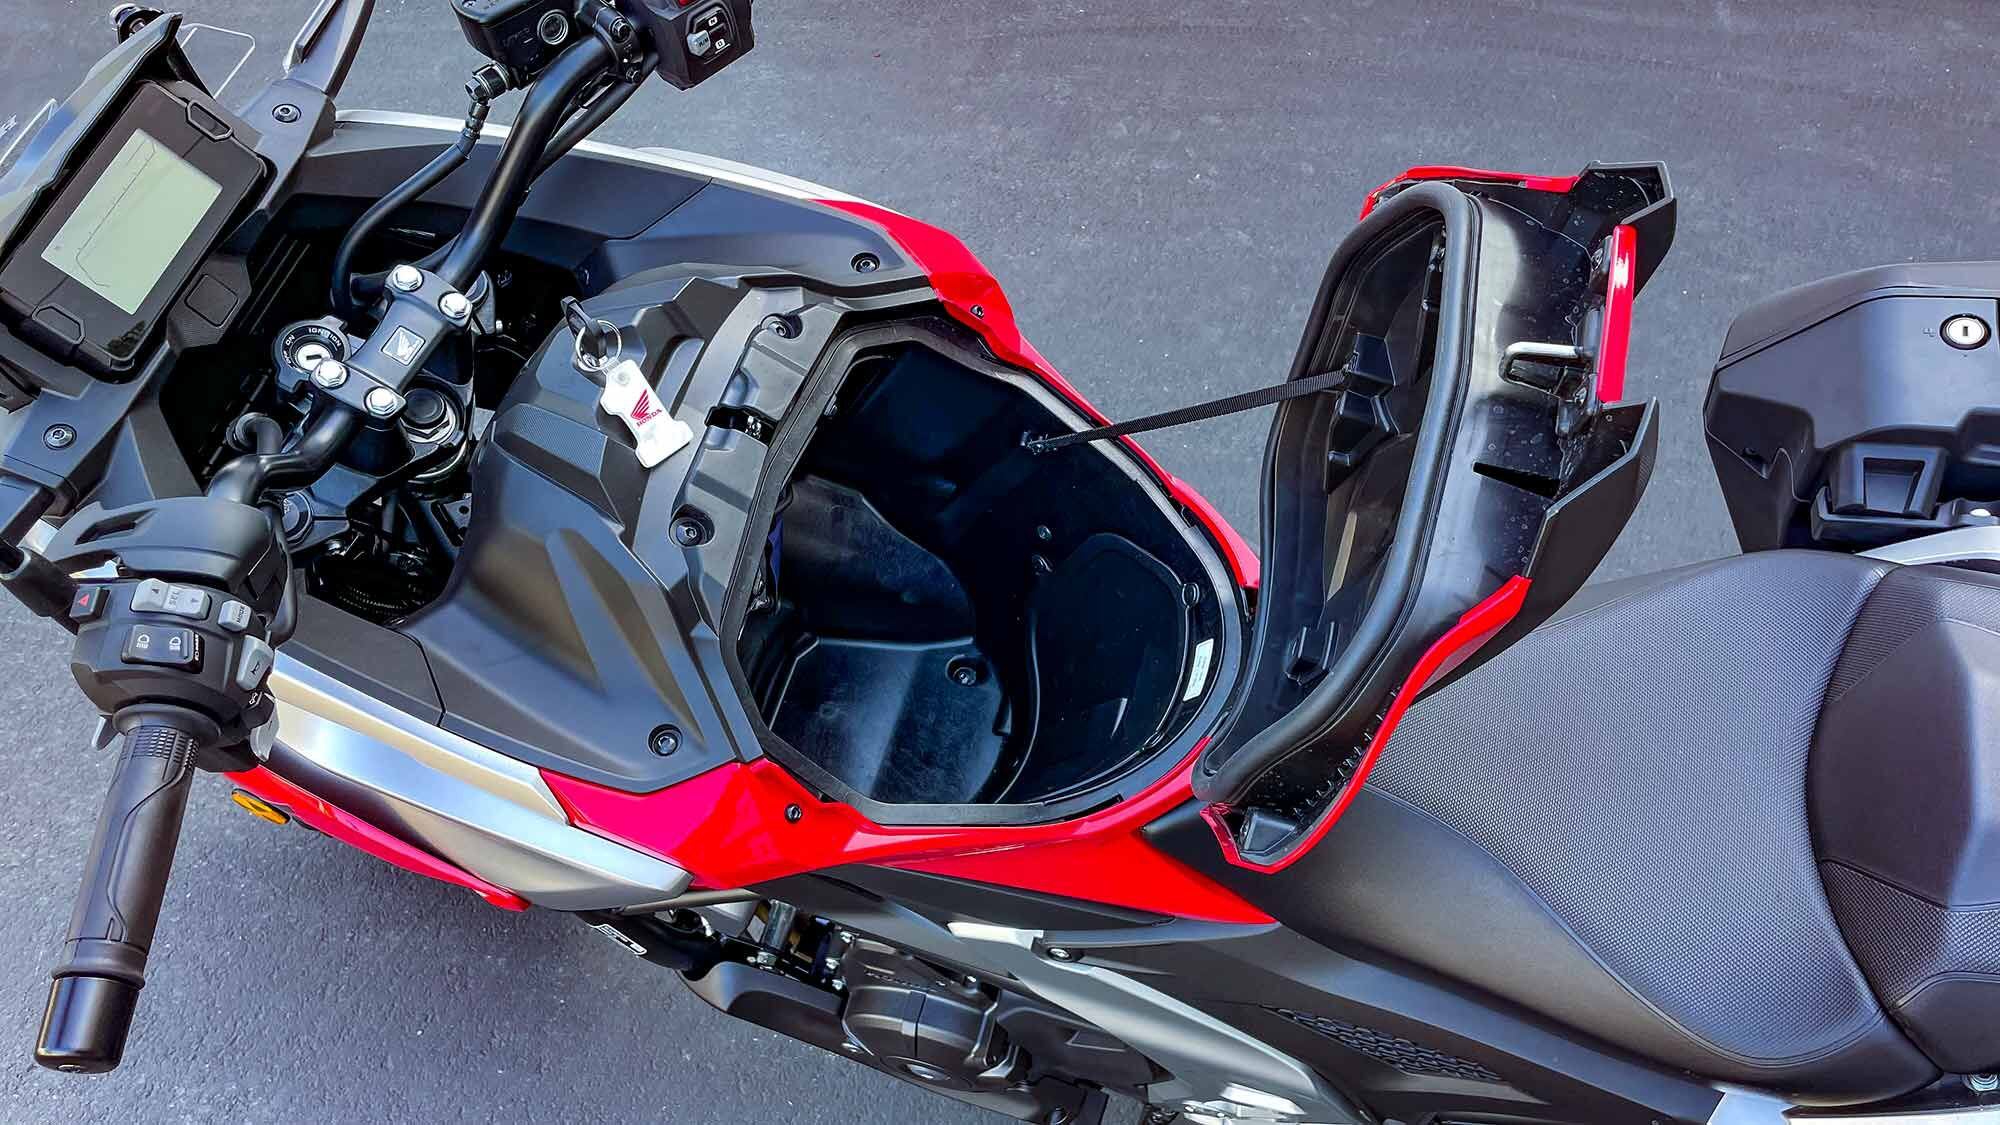 This 28-liter internal storage compartment takes up the traditional location of the fuel tank. Honda claims it will fit most full-face helmets, which we confirmed with an Arai Signet-X.